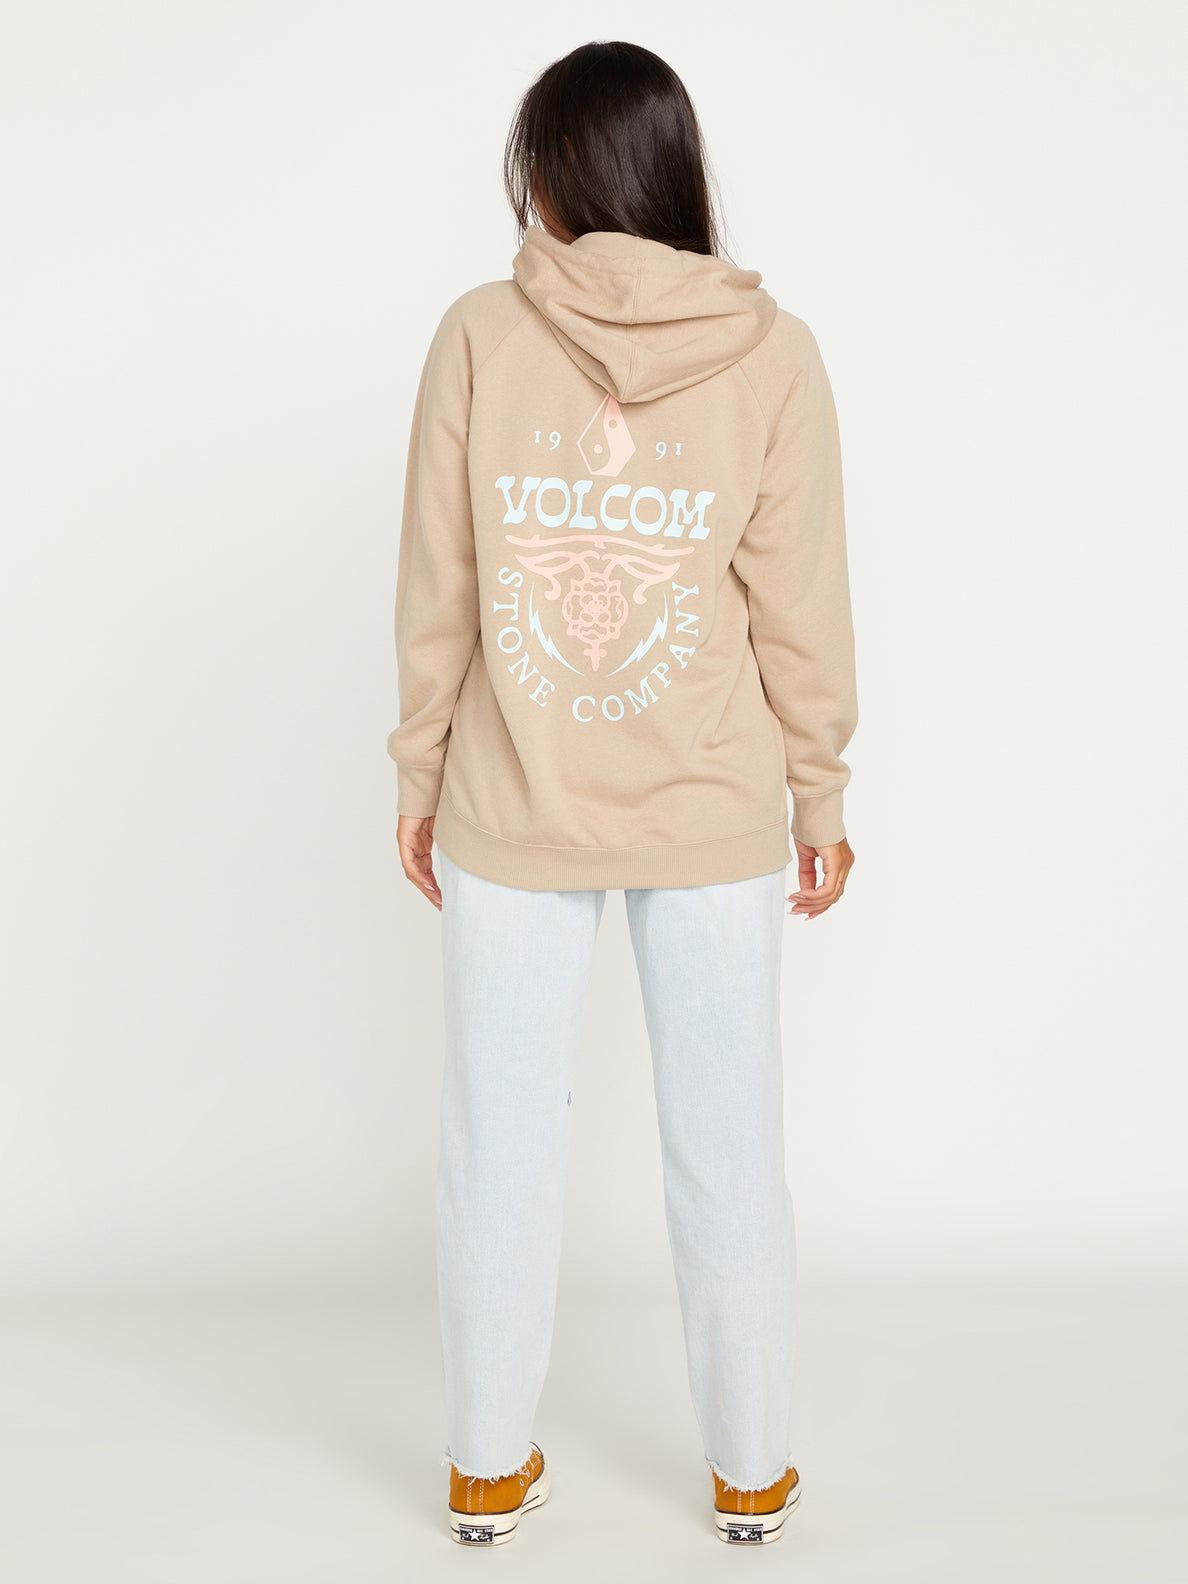 Truly Stoked Boyfriend Pullover Hoodie - Taupe (B4112308_TAU) [B]